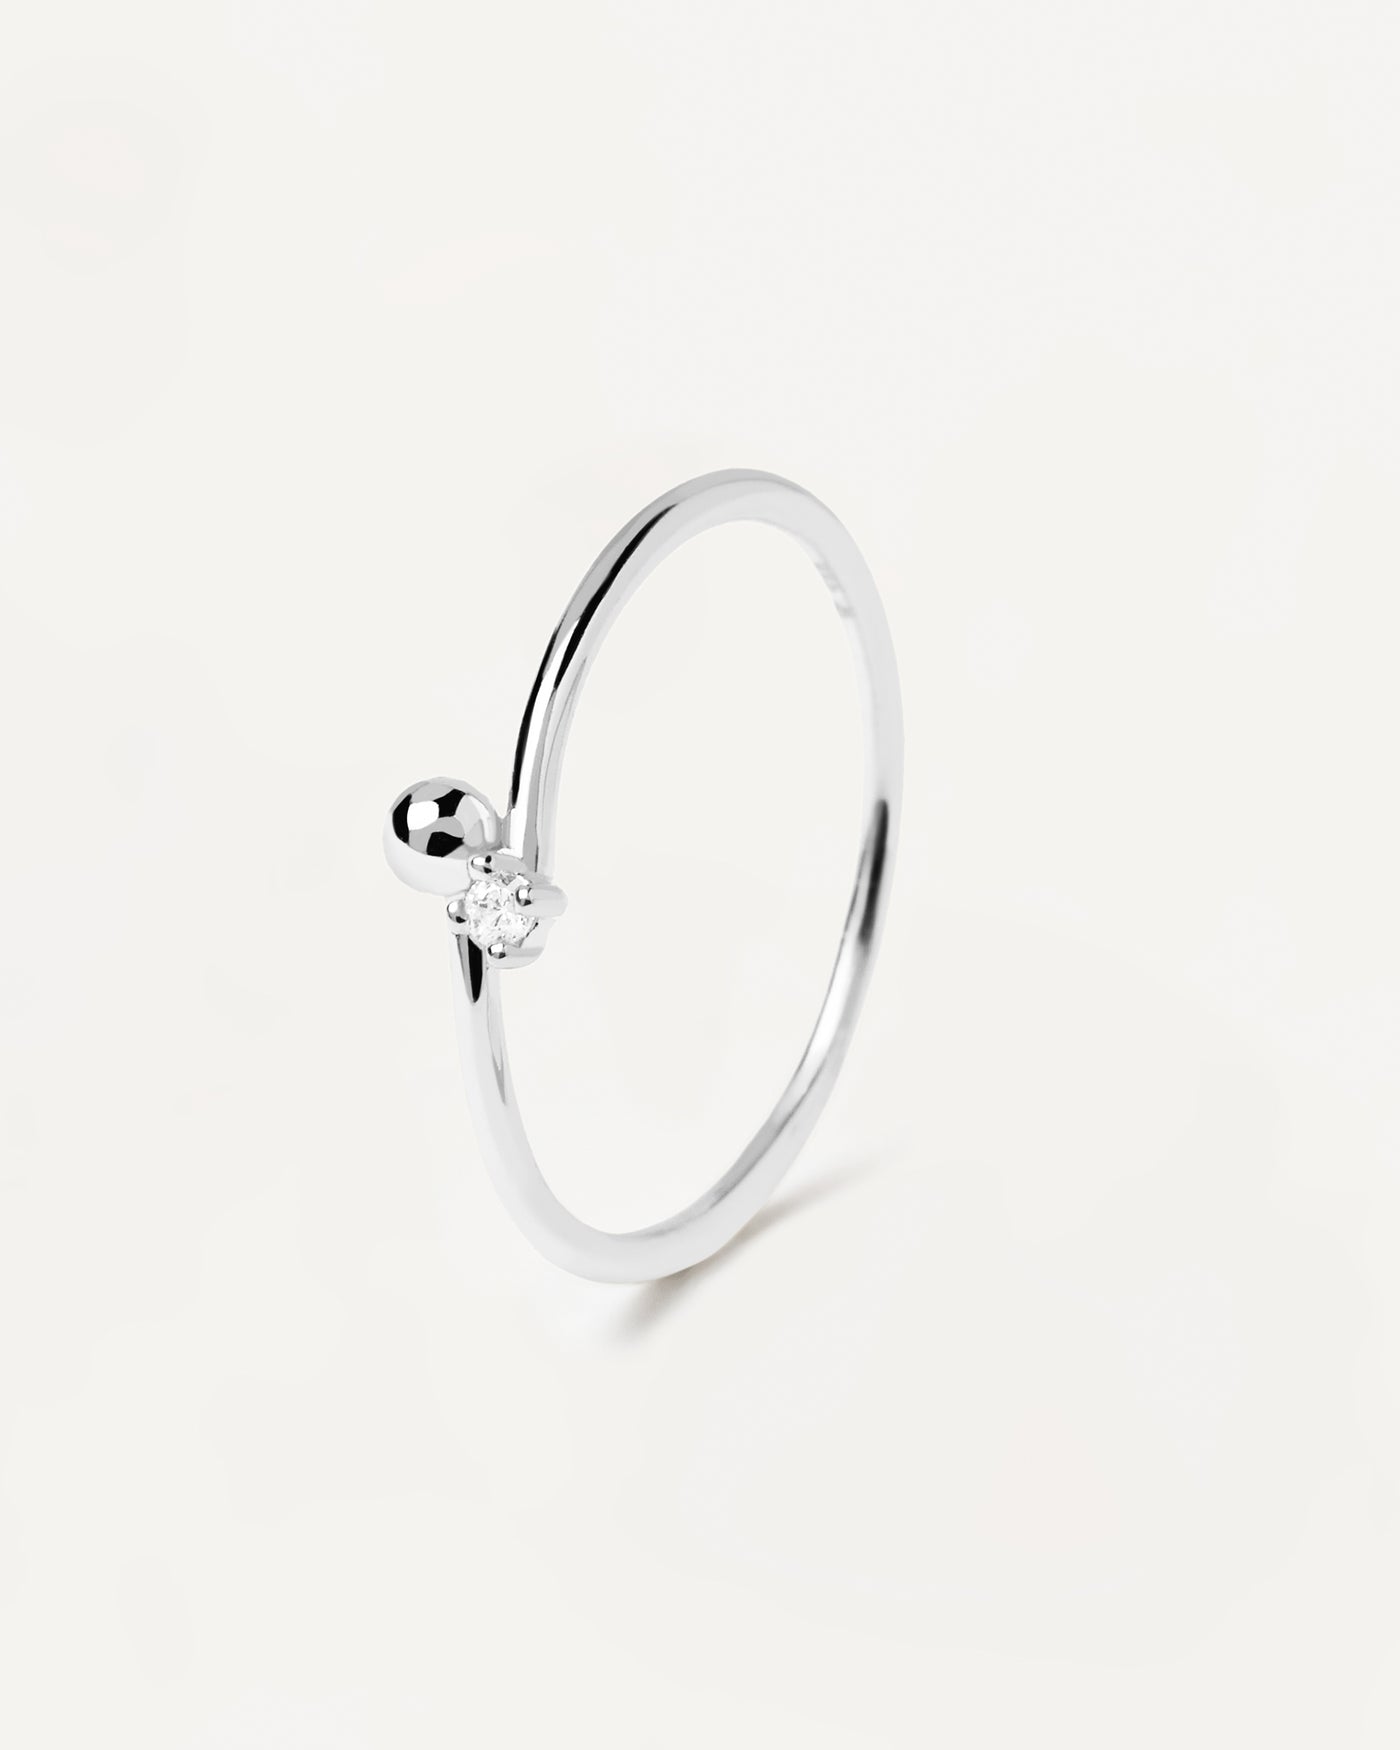 Essentia Silver Ring - 925 sterling silver